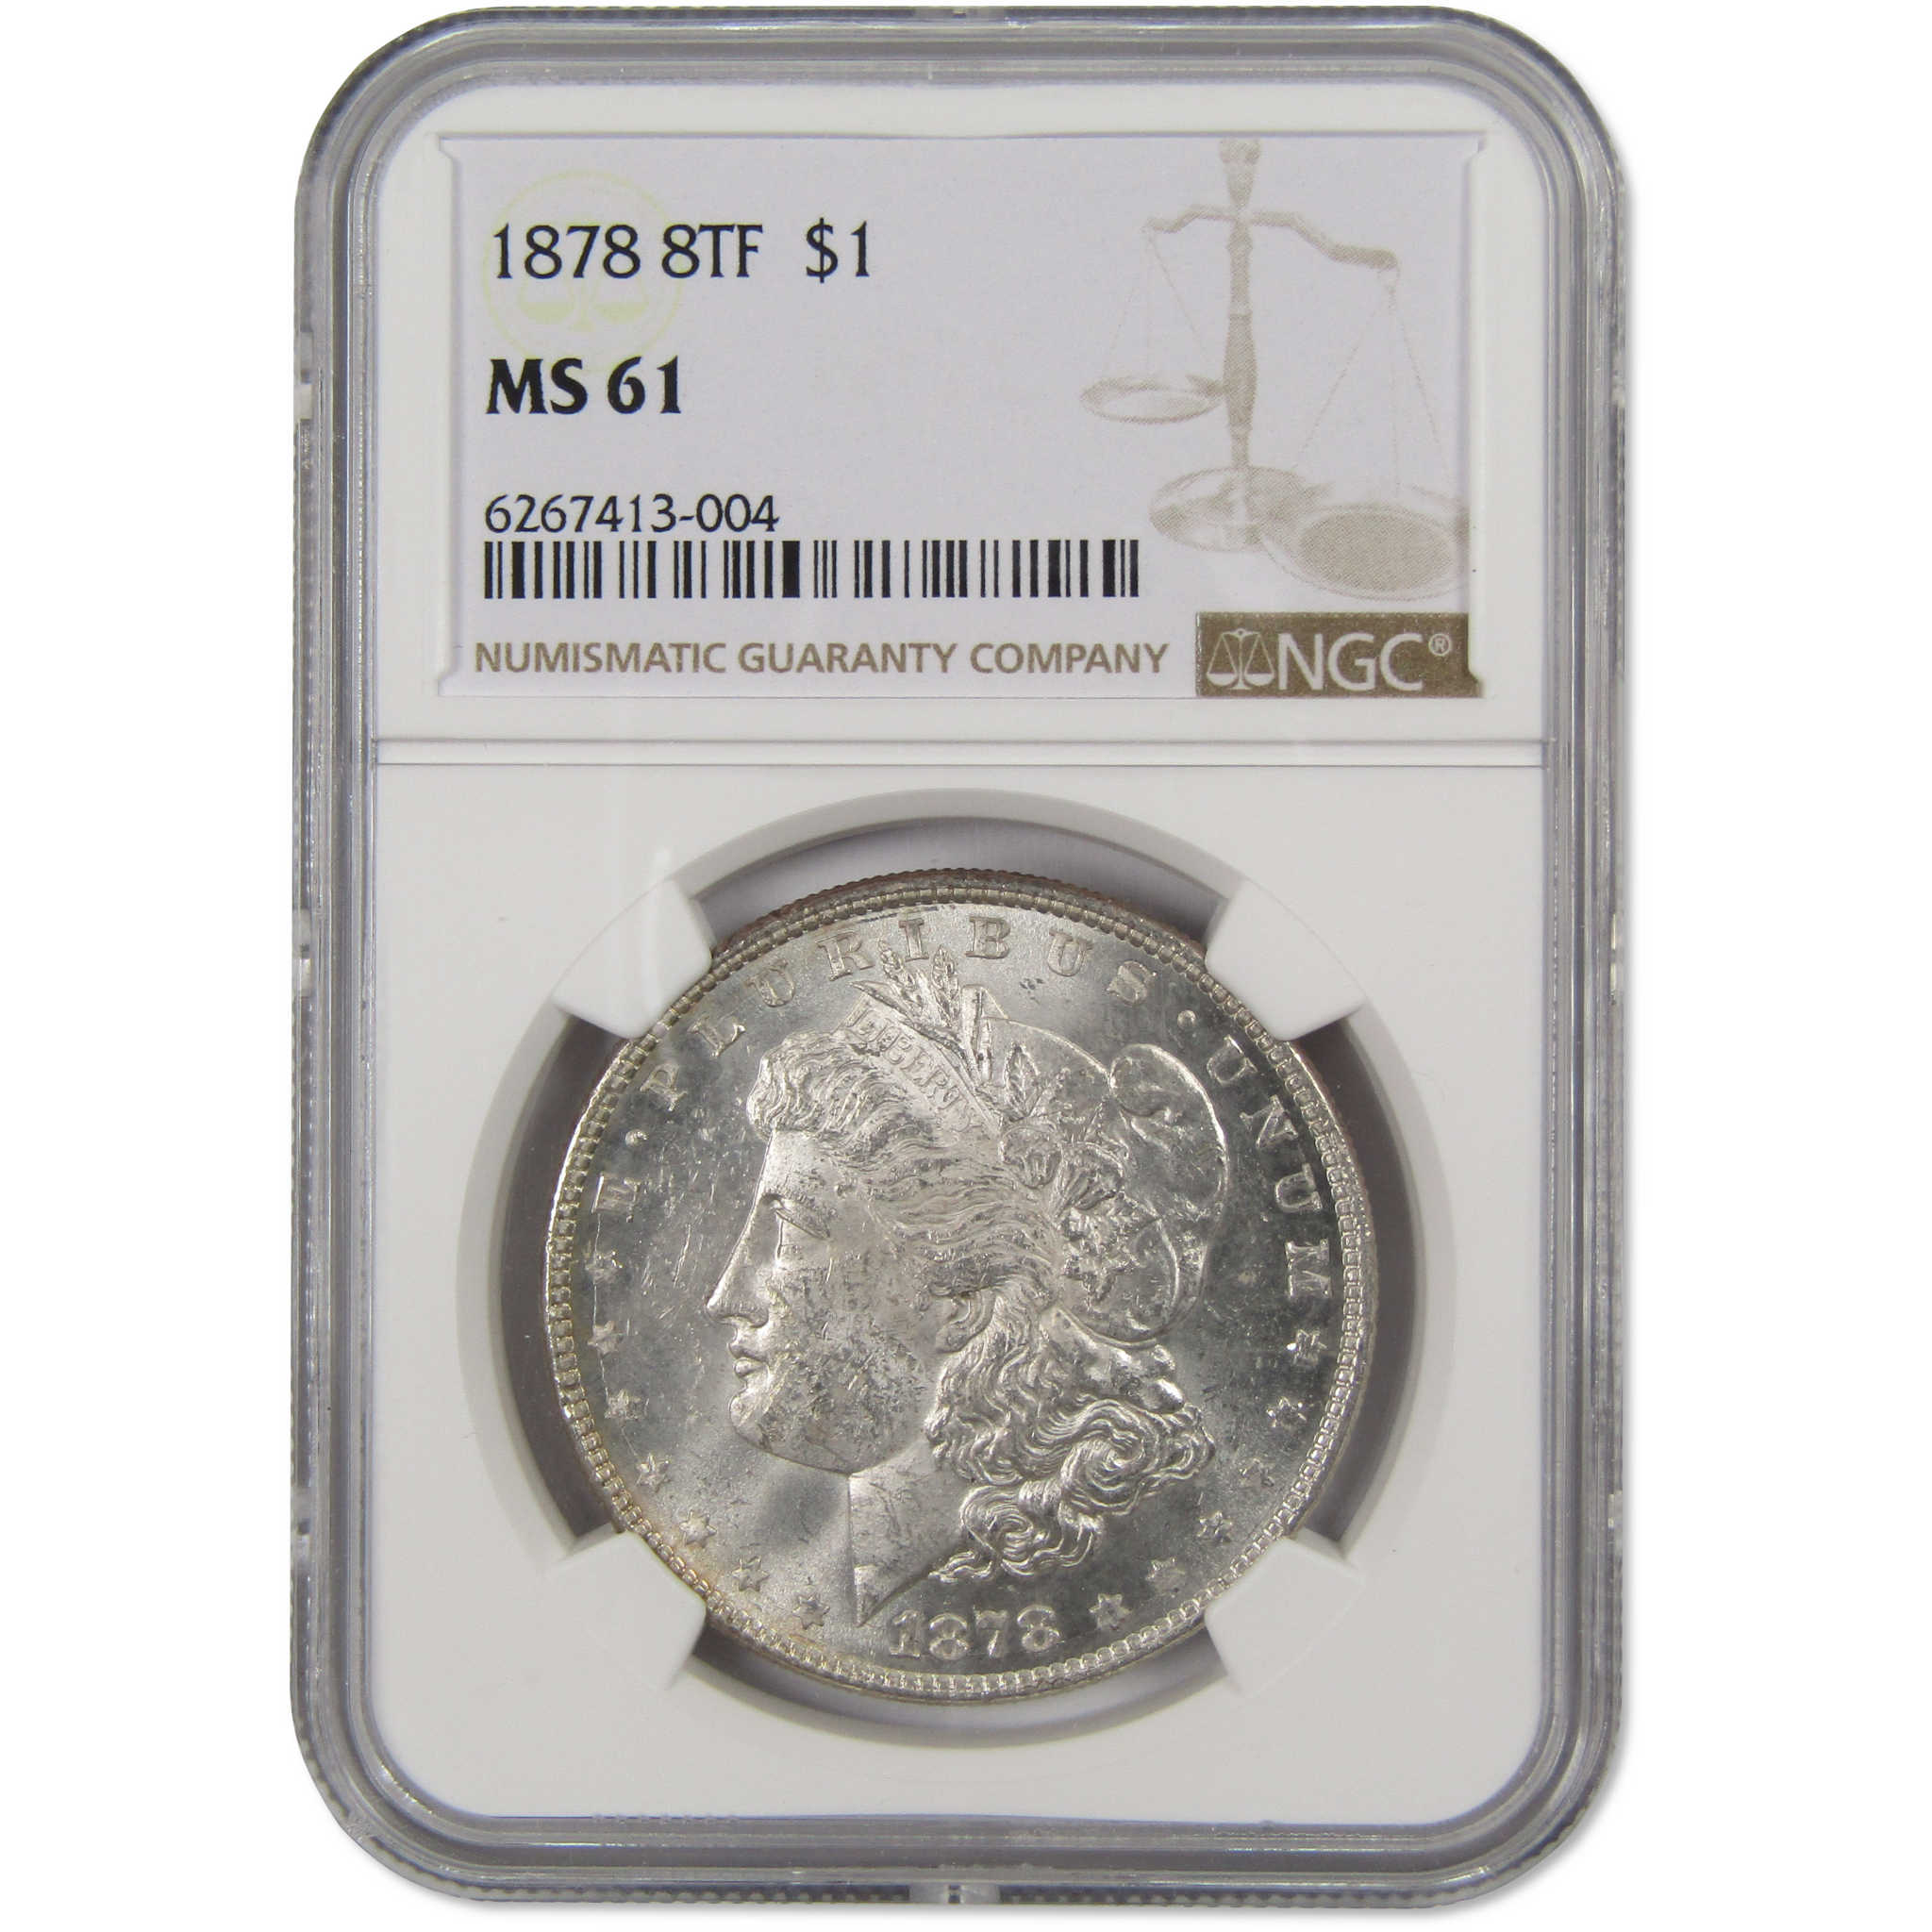 1878 8TF Morgan Dollar MS 61 NGC Silver $1 Uncirculated Coin SKU:I8302 - Morgan coin - Morgan silver dollar - Morgan silver dollar for sale - Profile Coins &amp; Collectibles